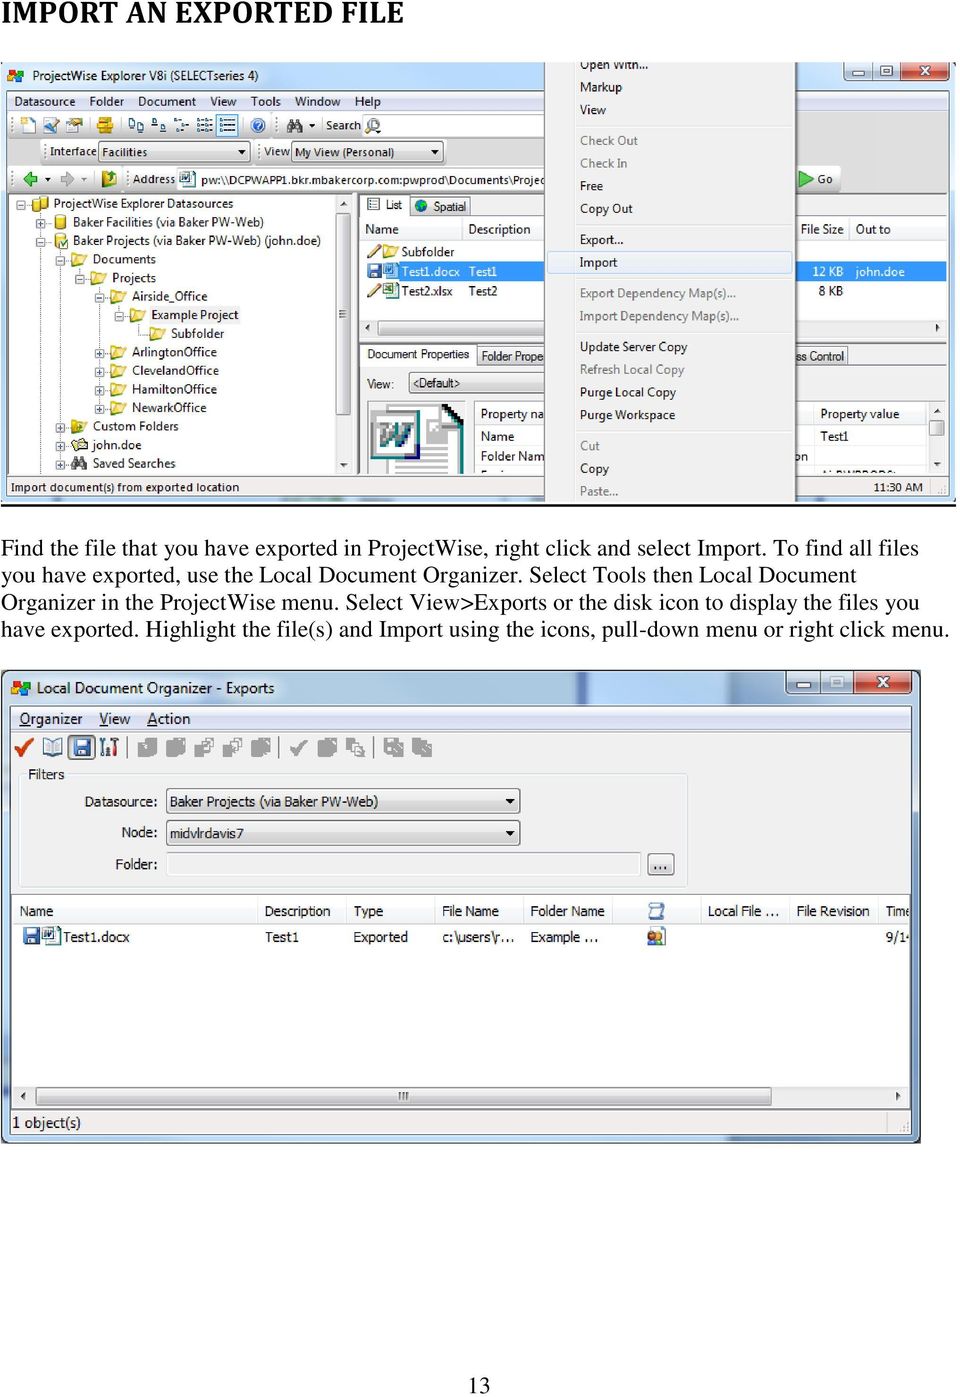 Select Tools then Local Document Organizer in the ProjectWise menu.